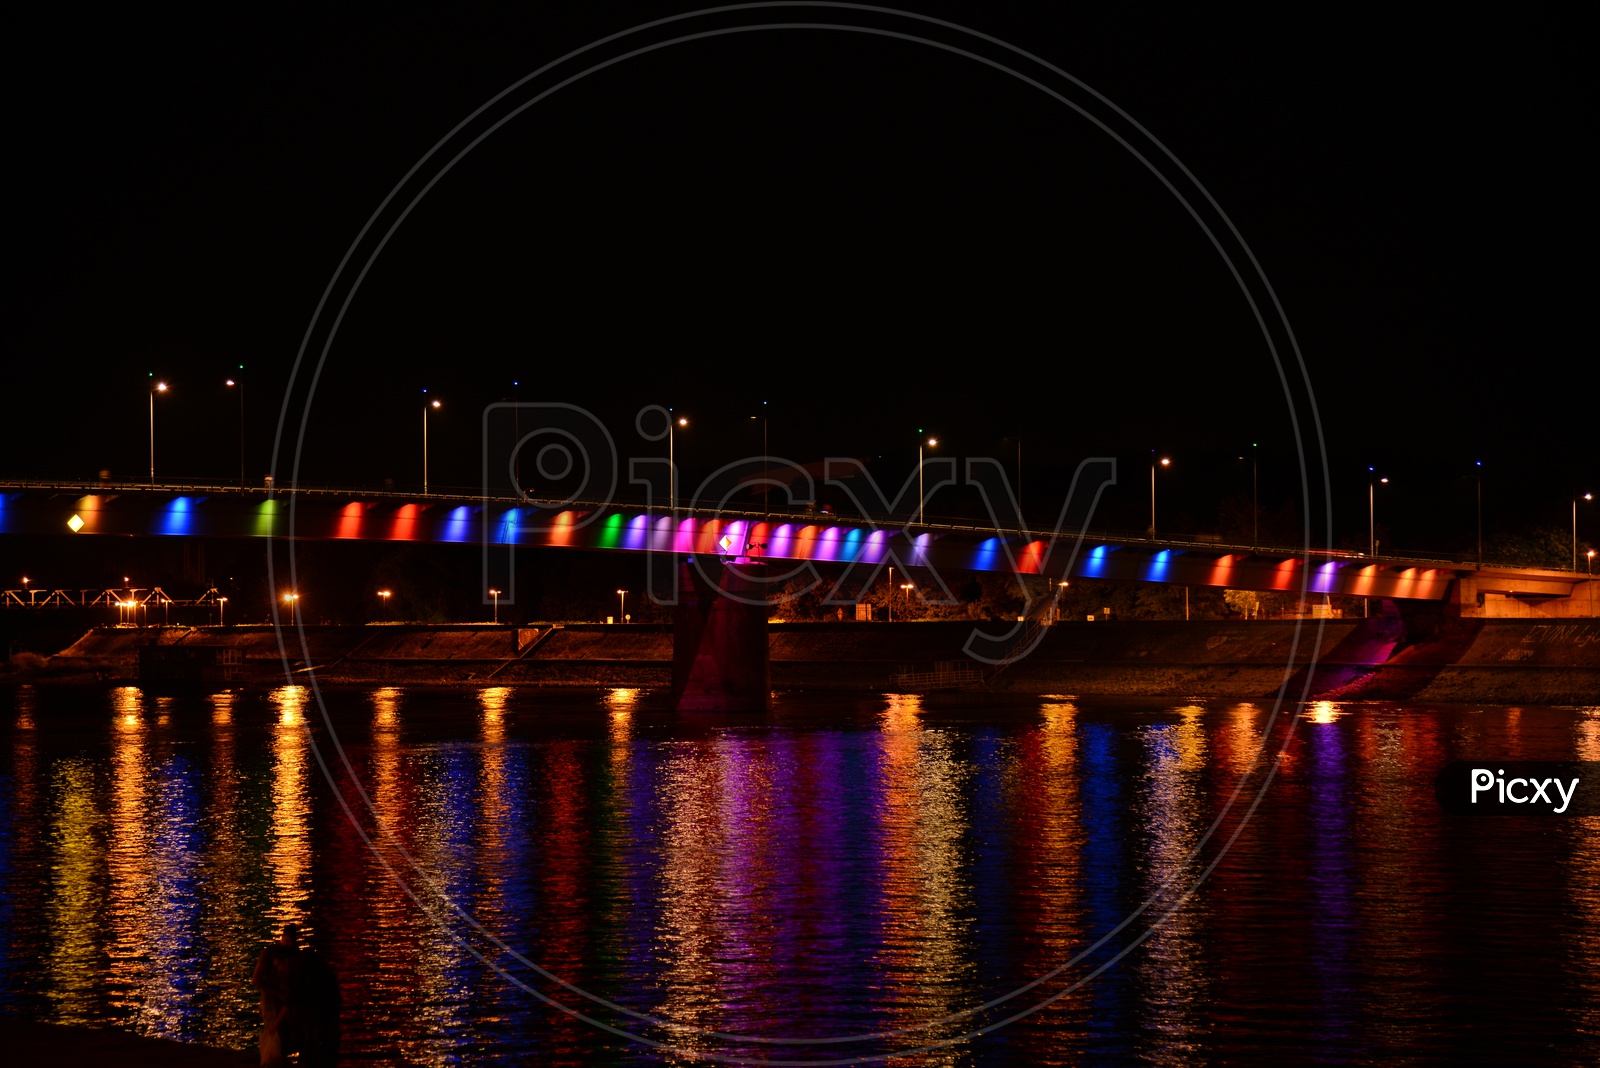 Seine River With Bridge Over It in night View With Color Neon Lights